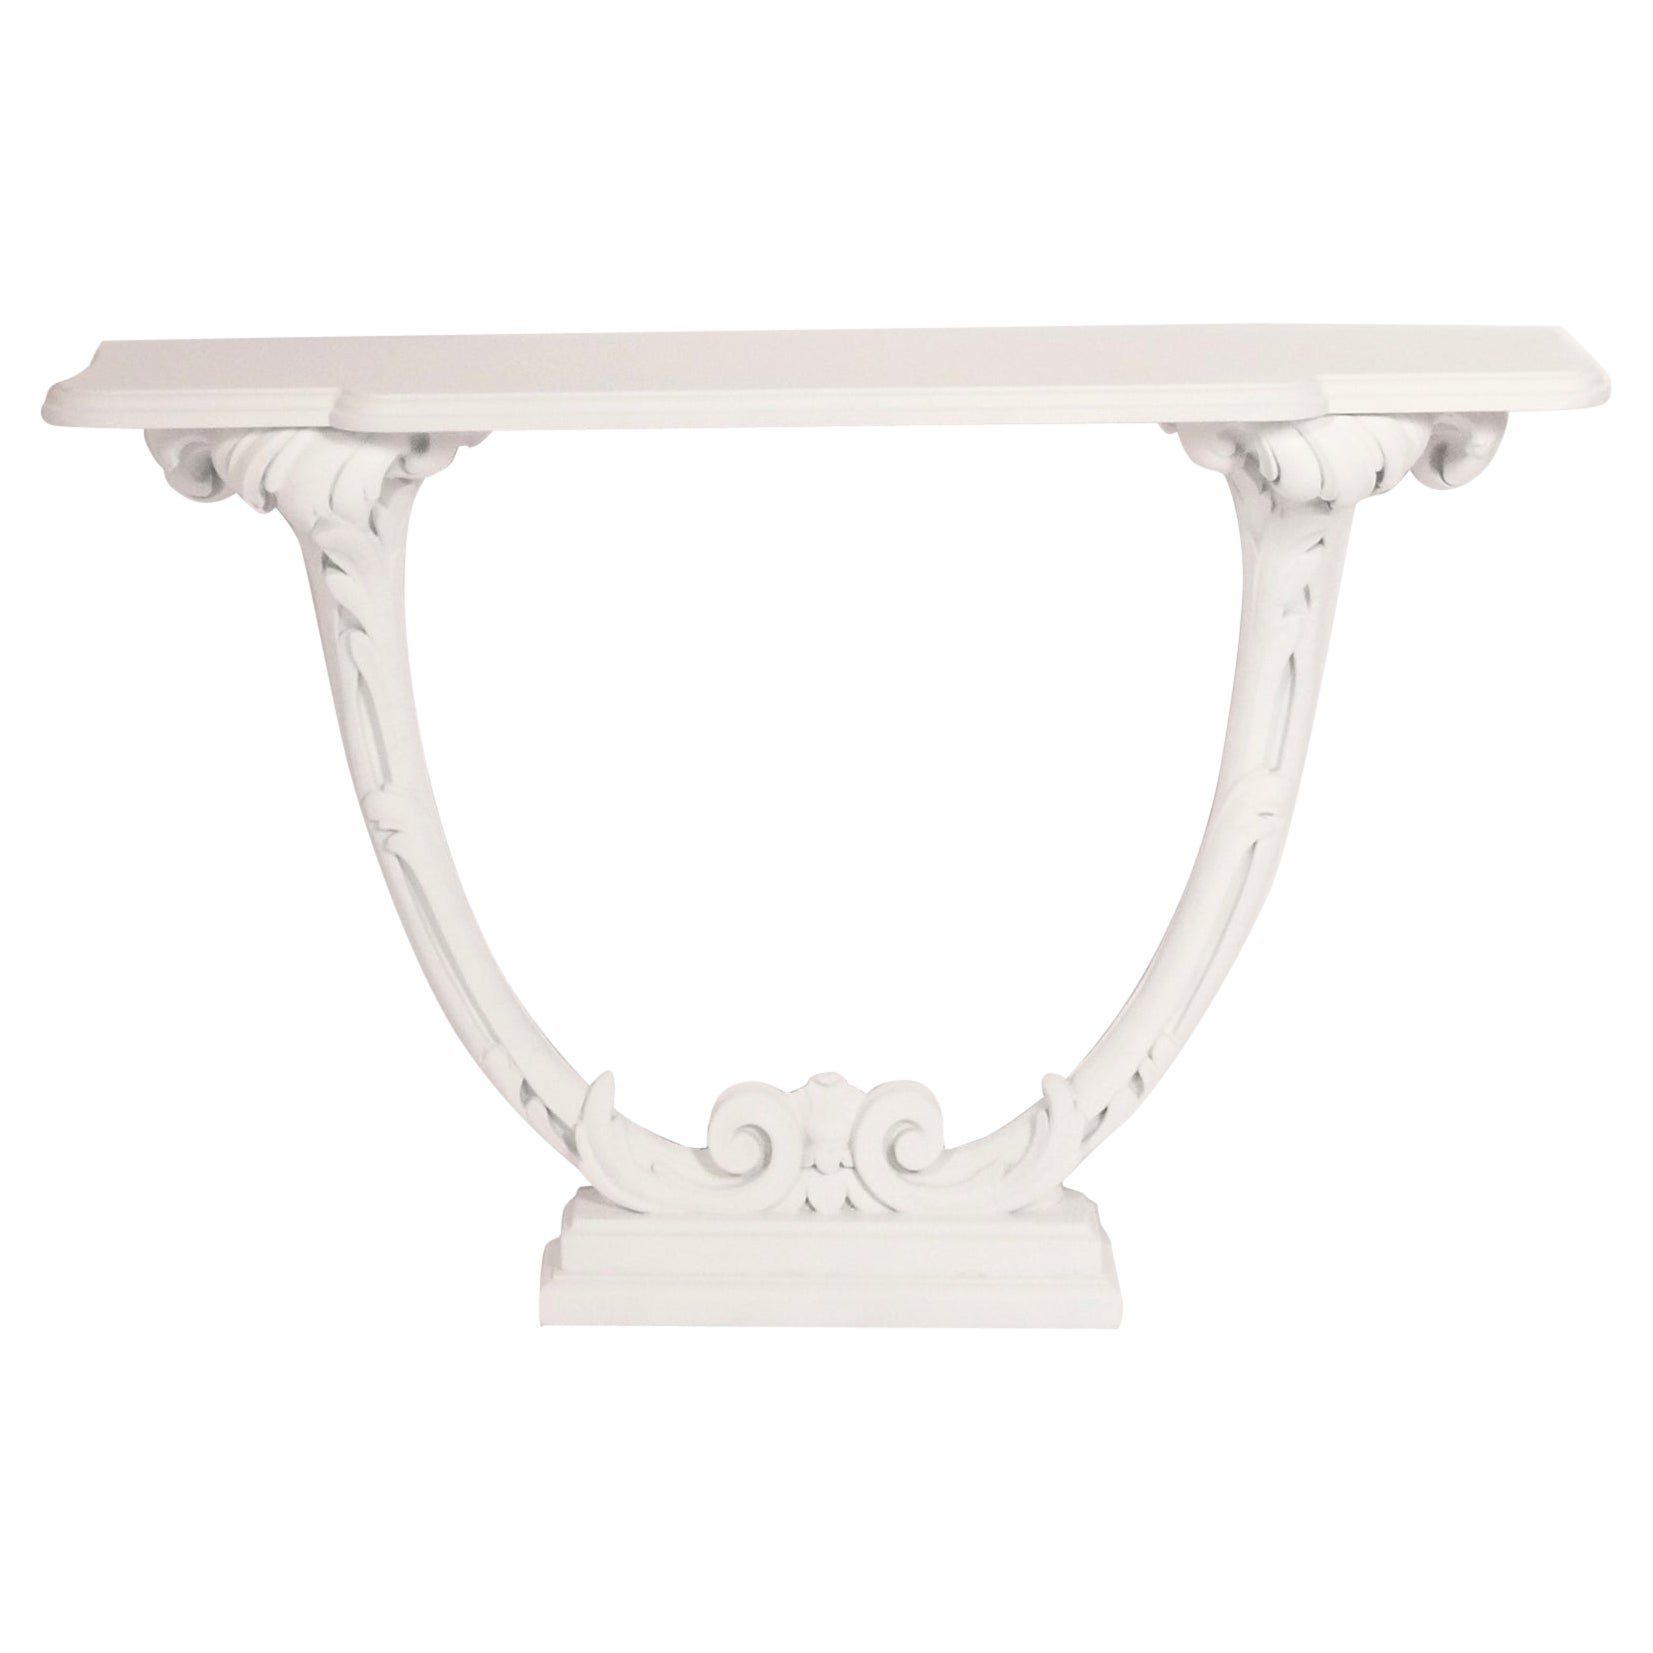 Serge Roche Style Plaster and Wood Console Table